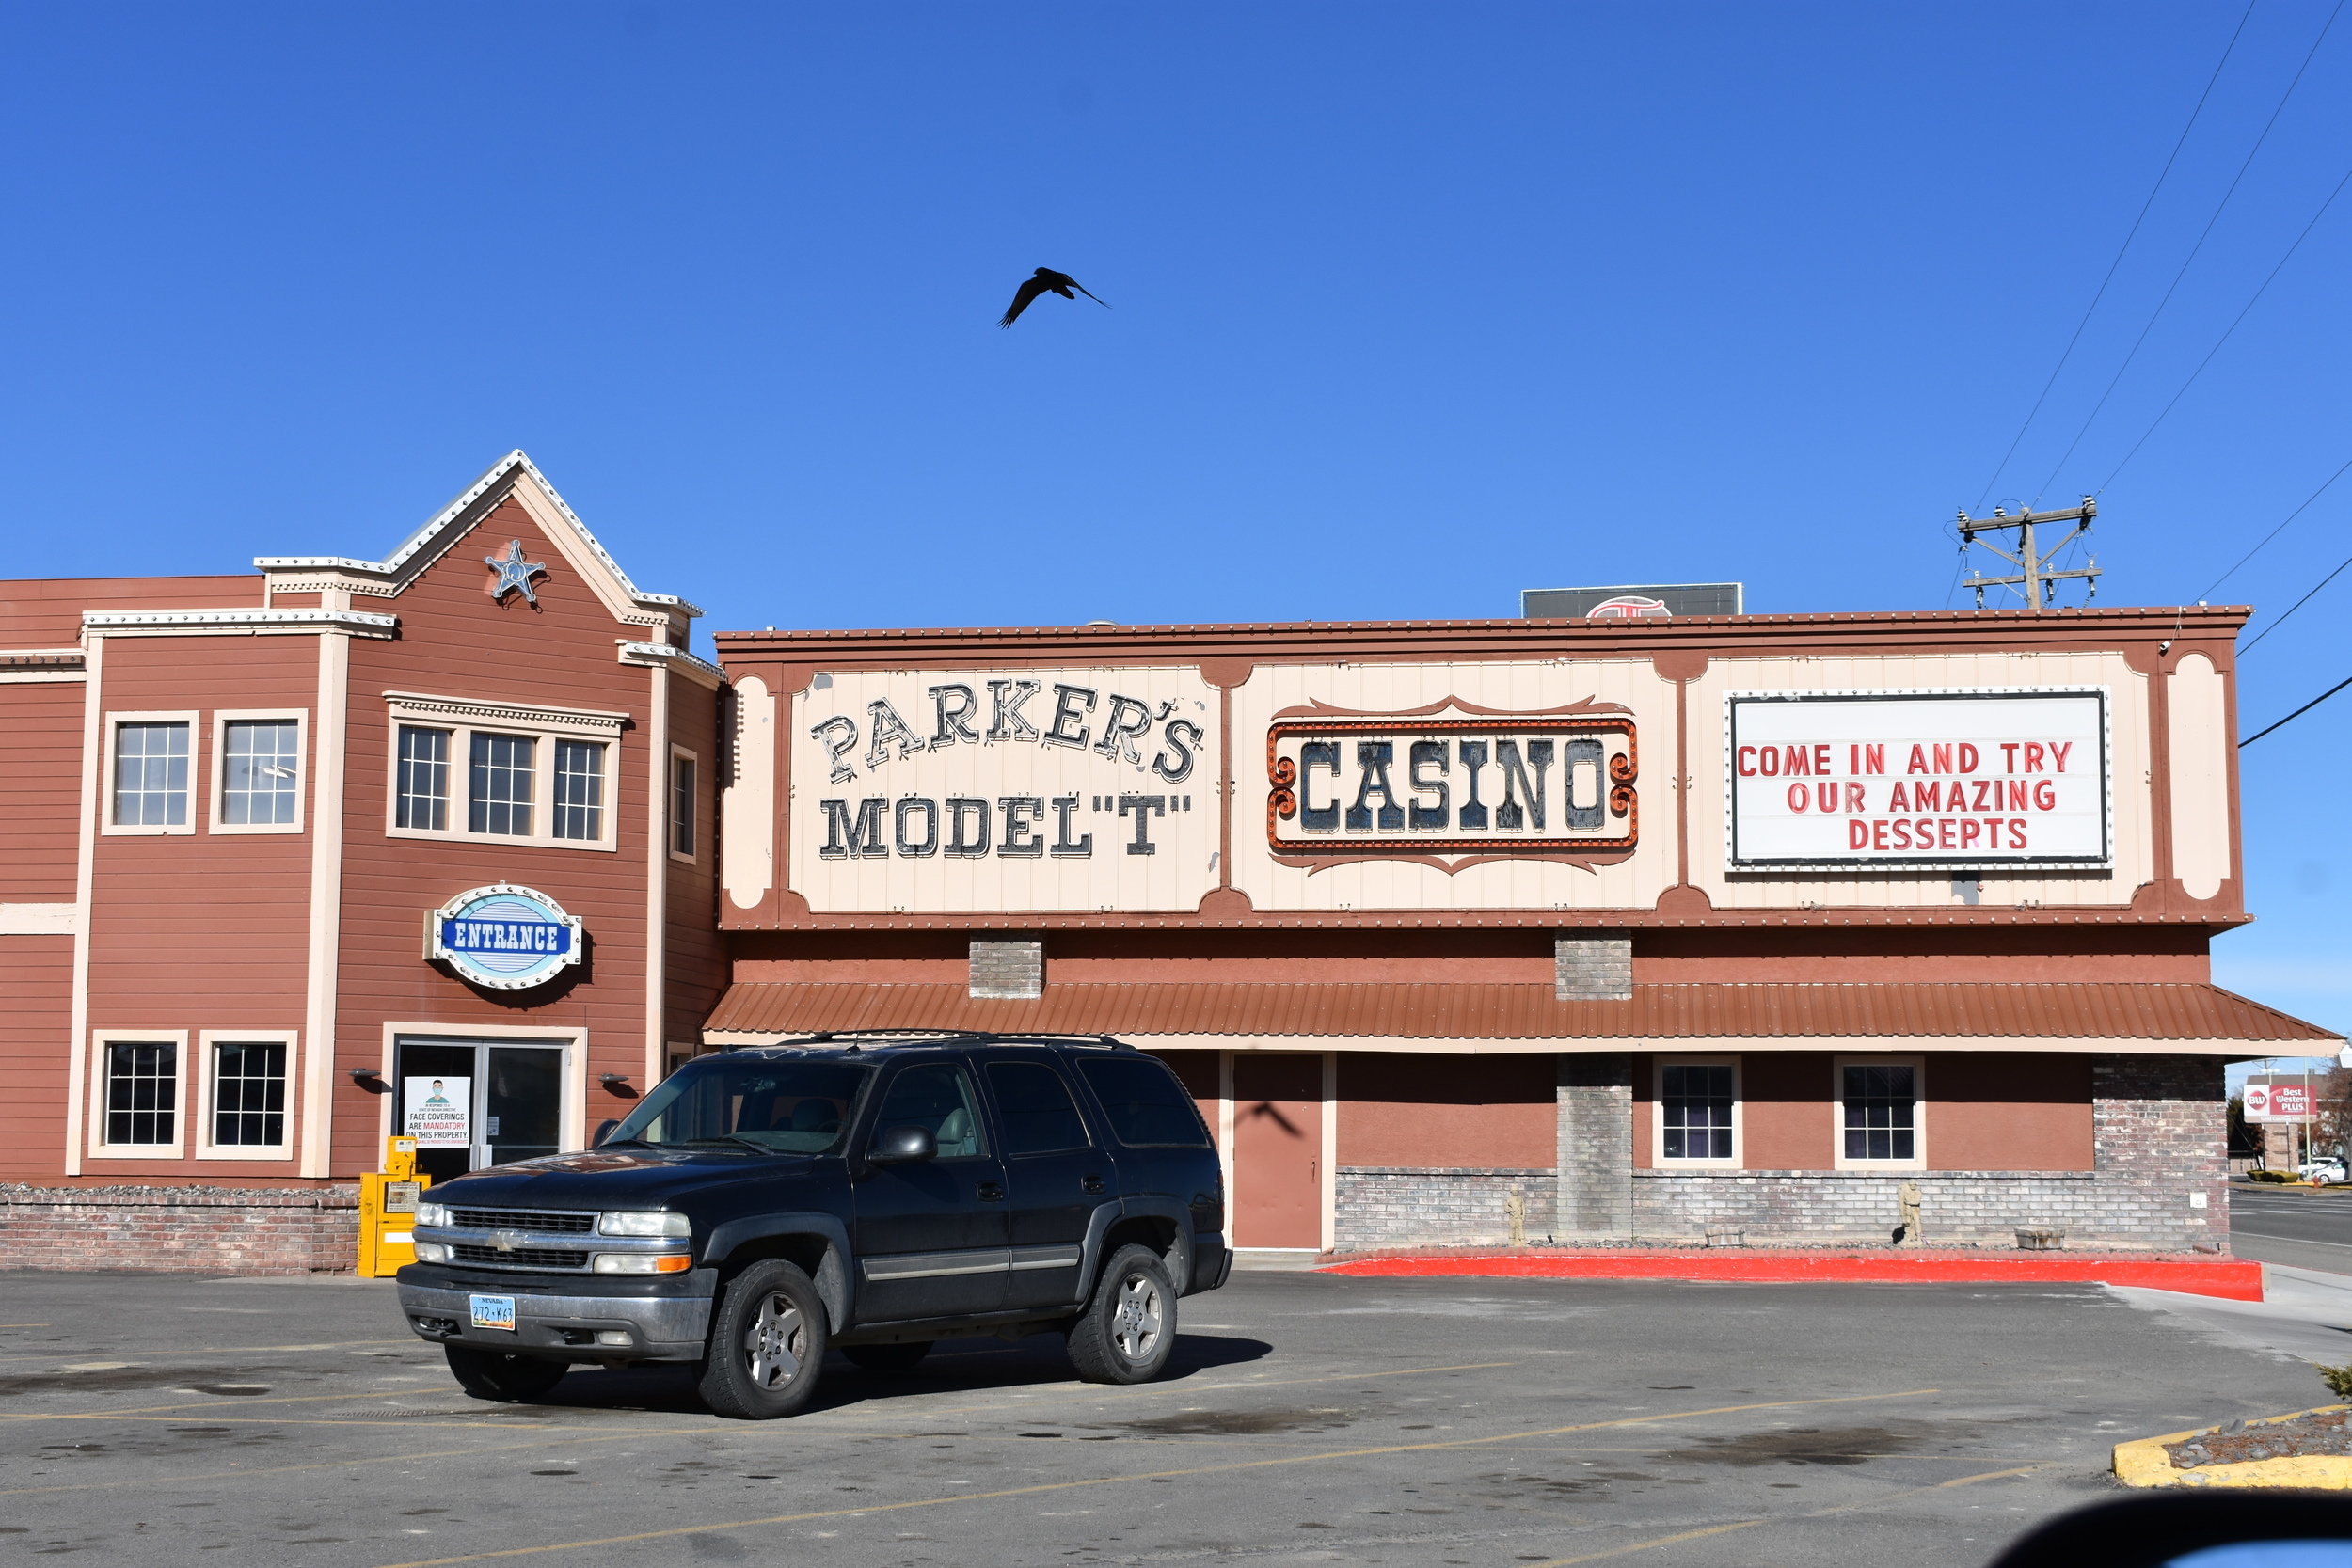 Parker's Model T Casino wall mounted signs, Winnemucca, Nevada